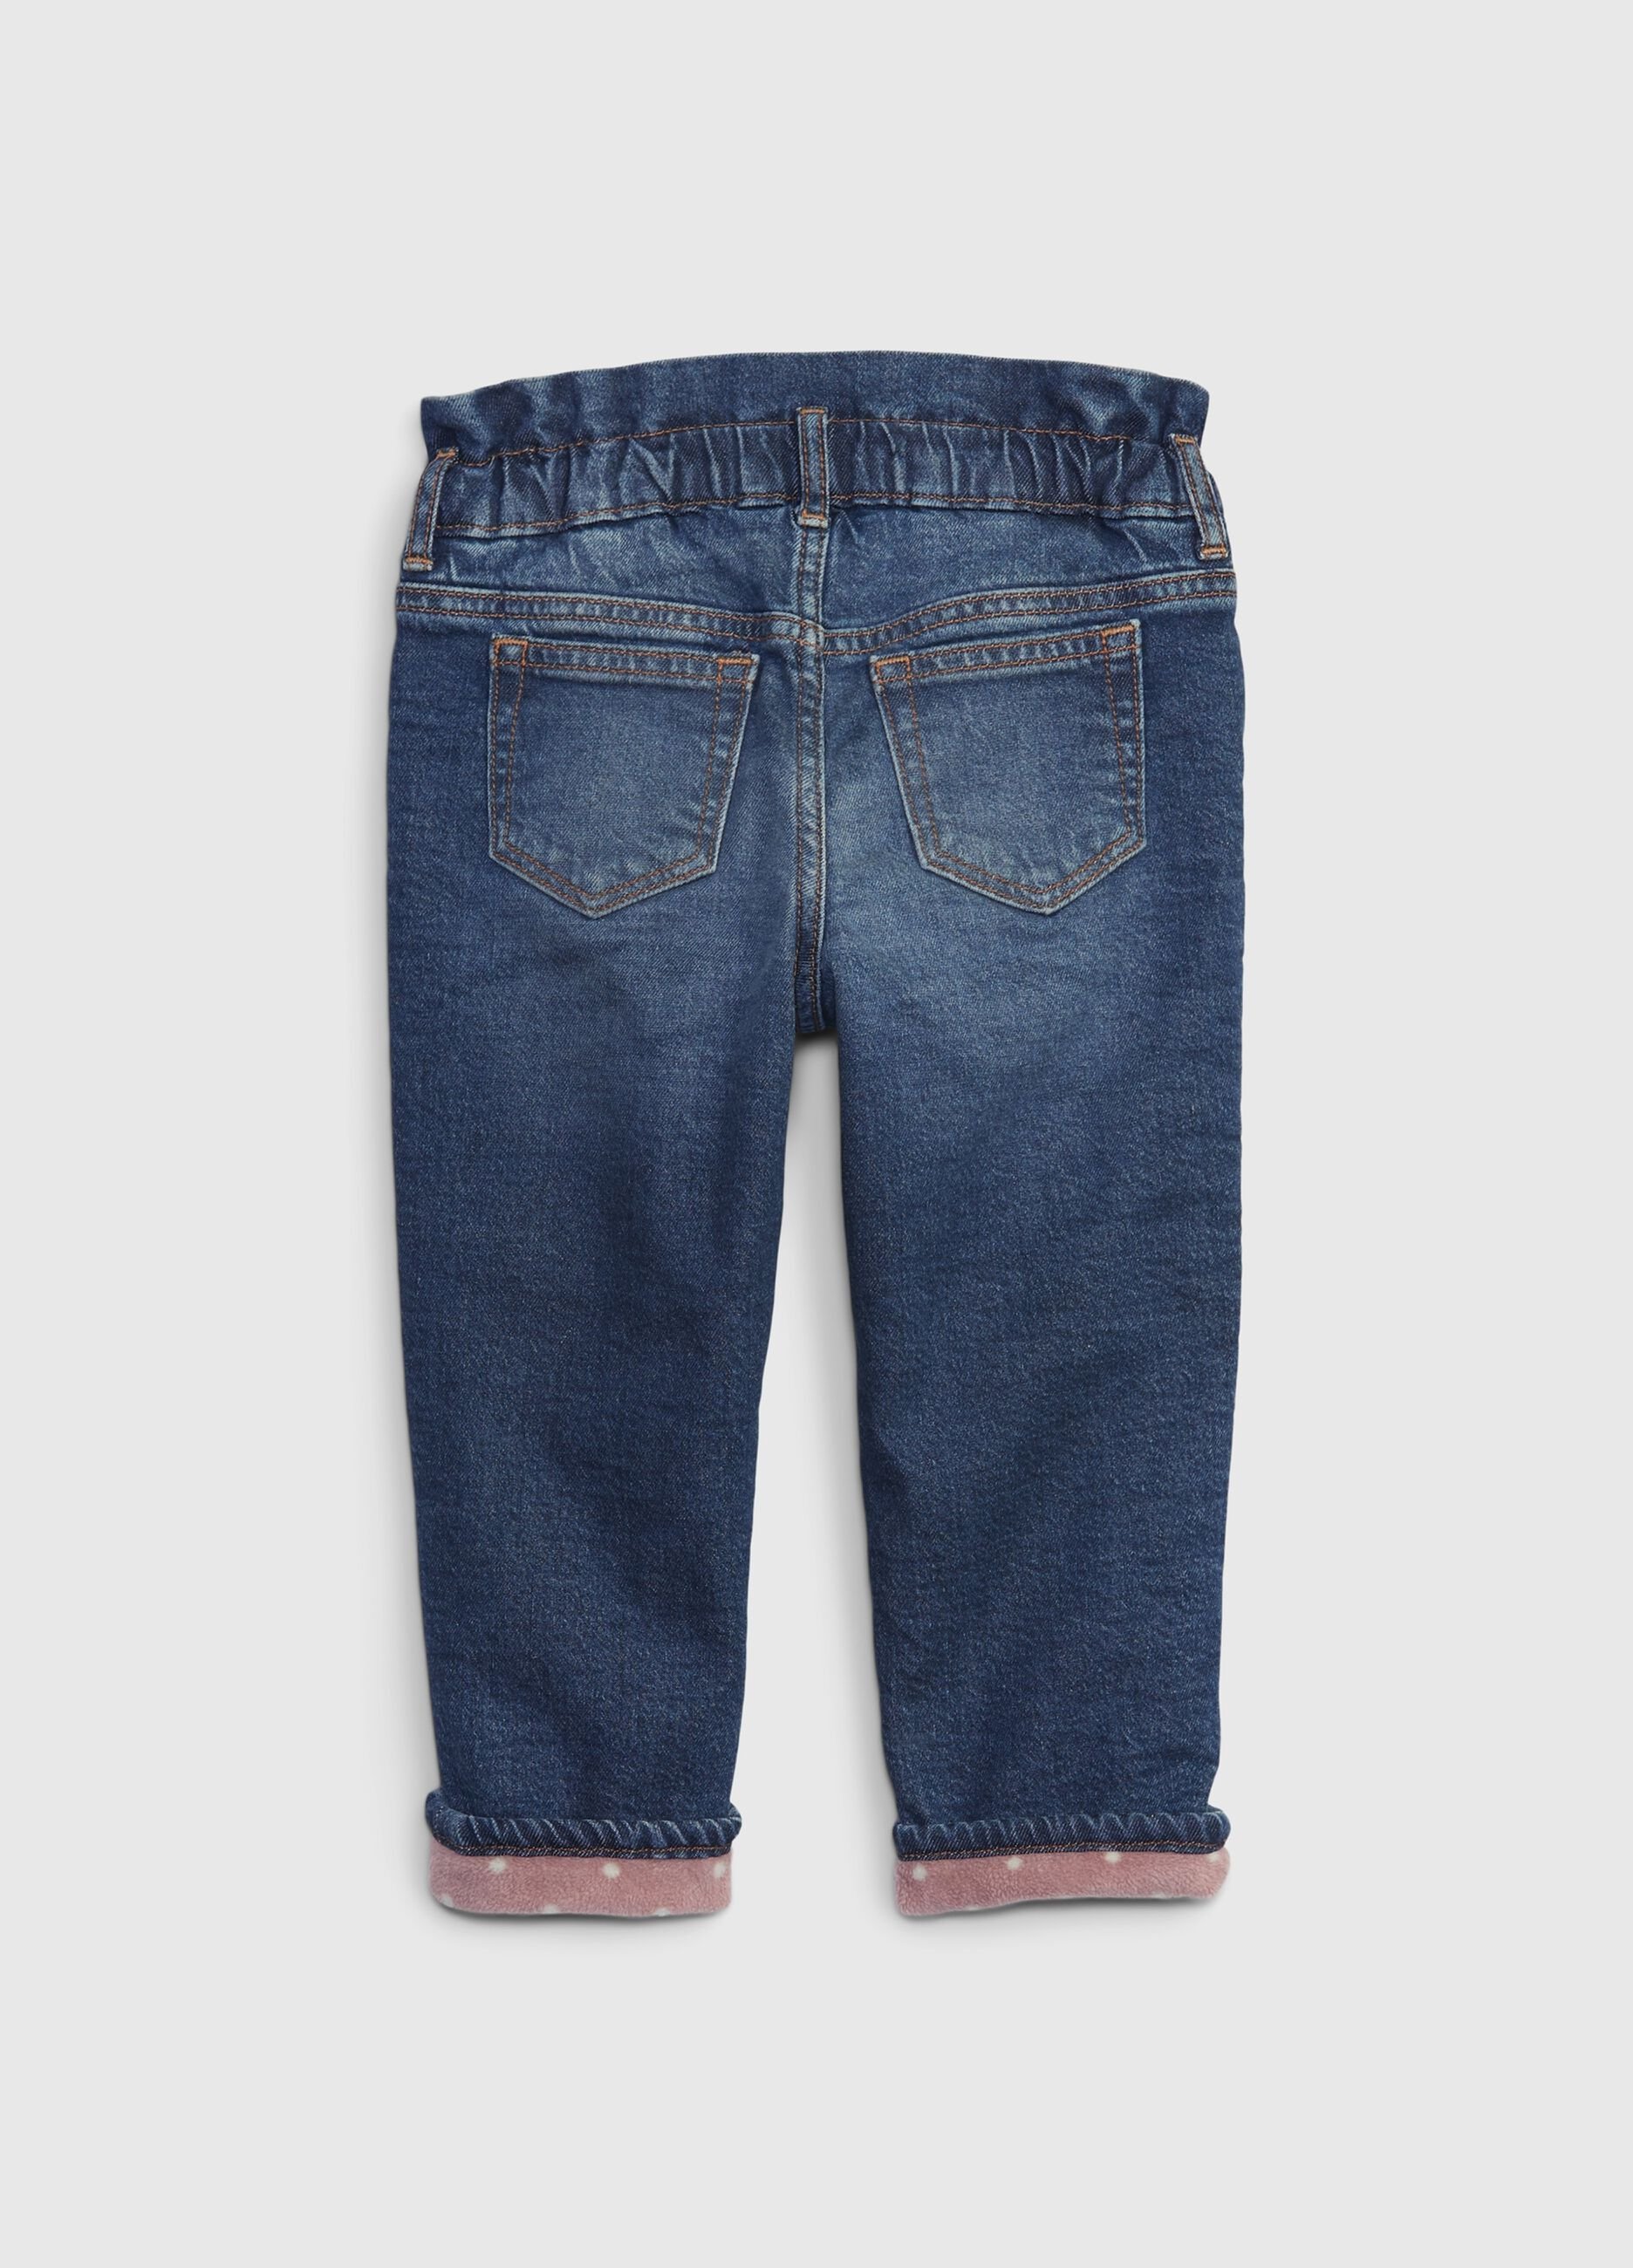 Mum-fit jeans with fleece polka dot lining_1